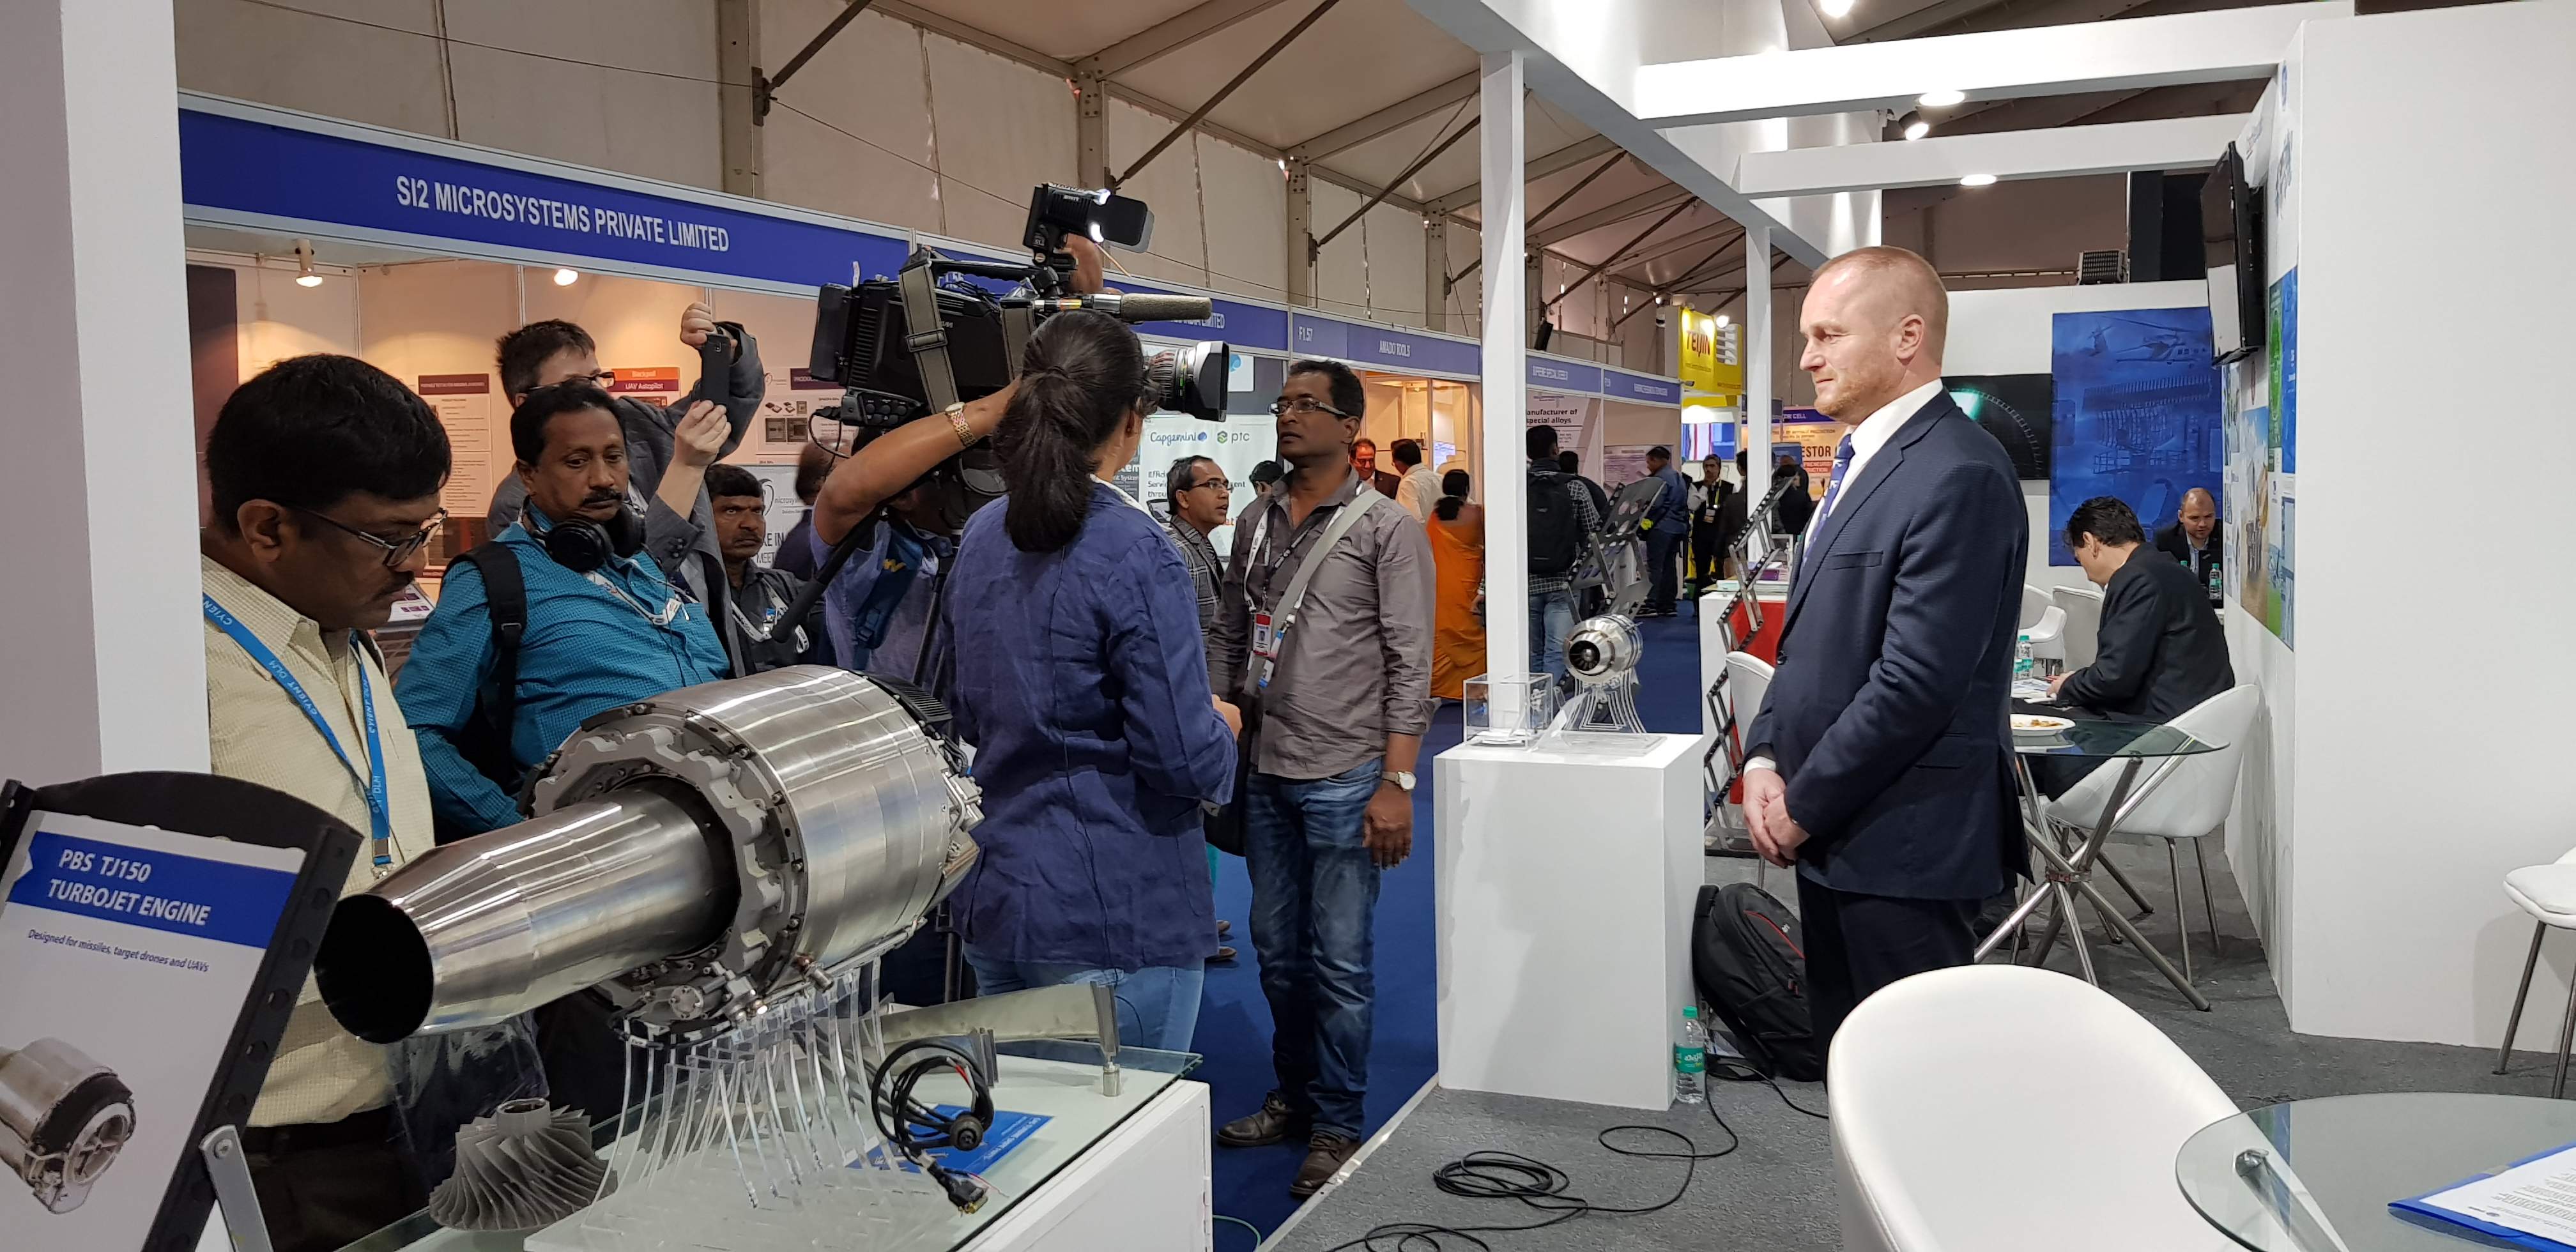 Minister Metnar supported us at AERO INDIA where we participated in talks with the Indian representatives and were interviewed by Channel ONE 